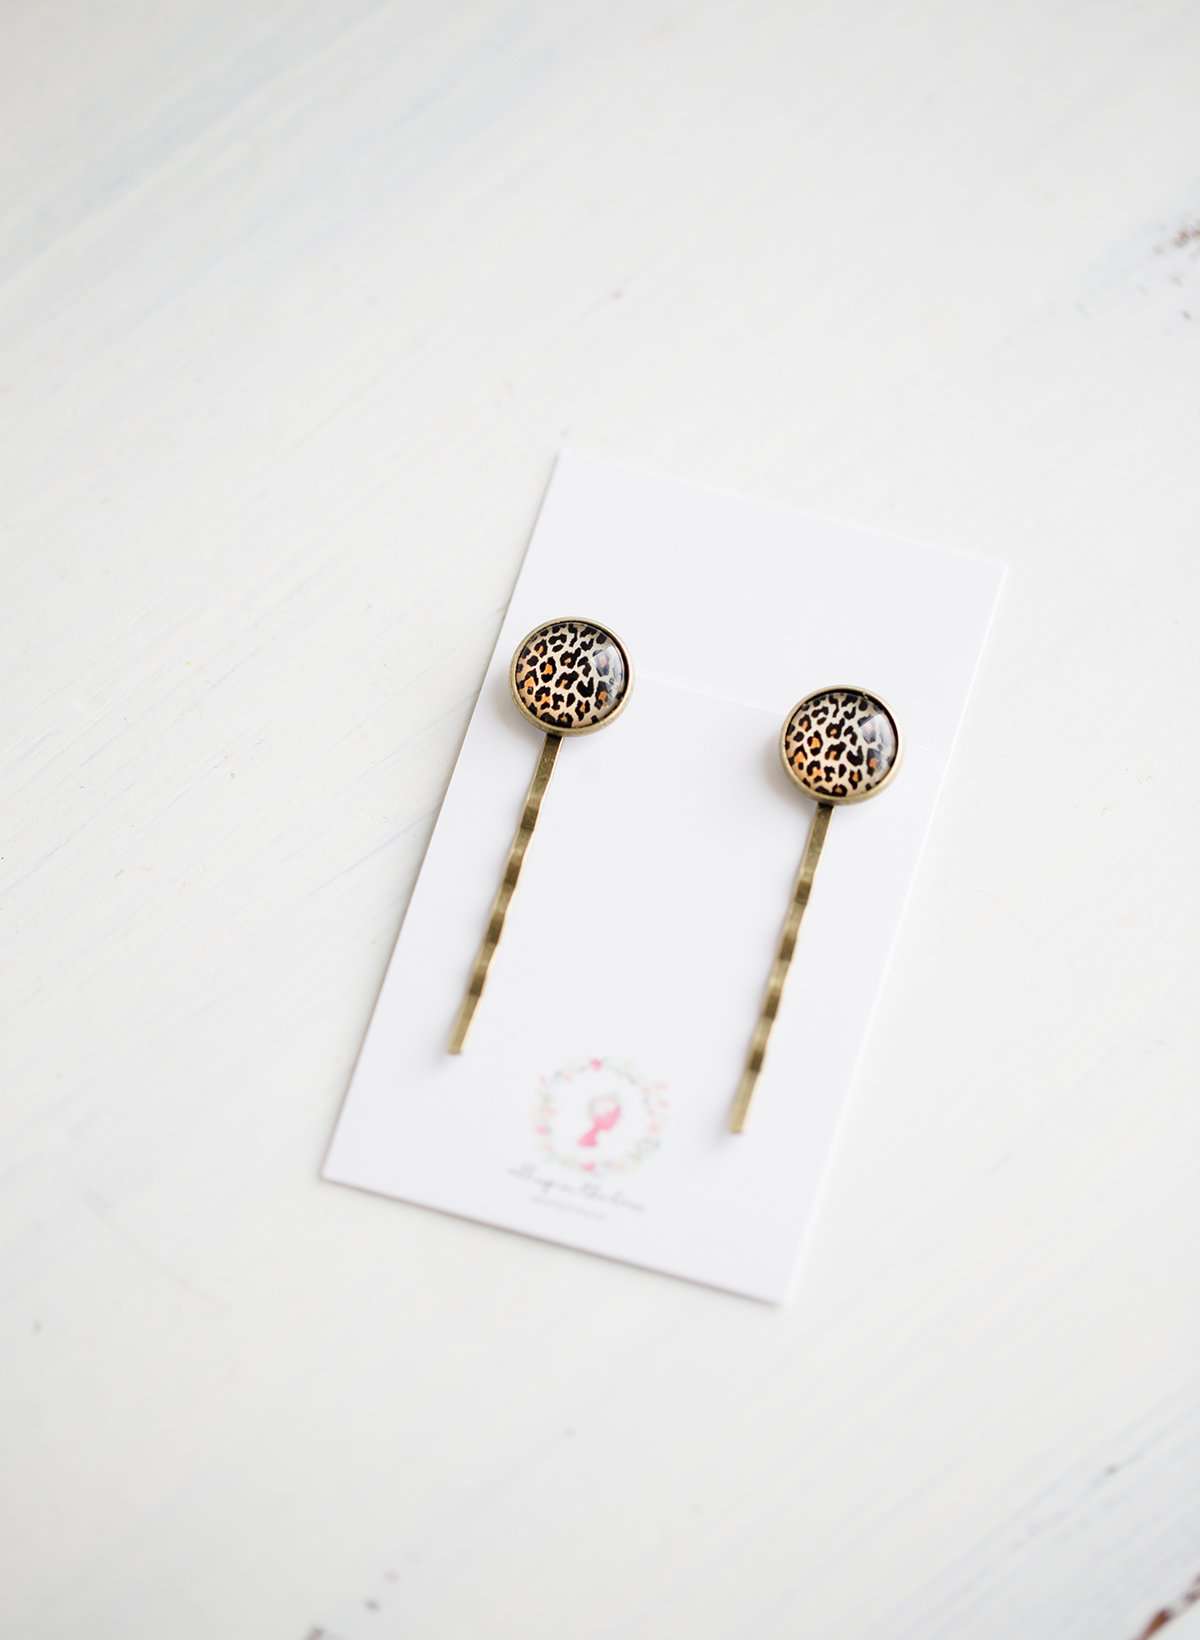 We love these unique, Cheetah Bobby Pins! These make a fun addition to your hair for small bursts of fun. You will find these make a great gift too!